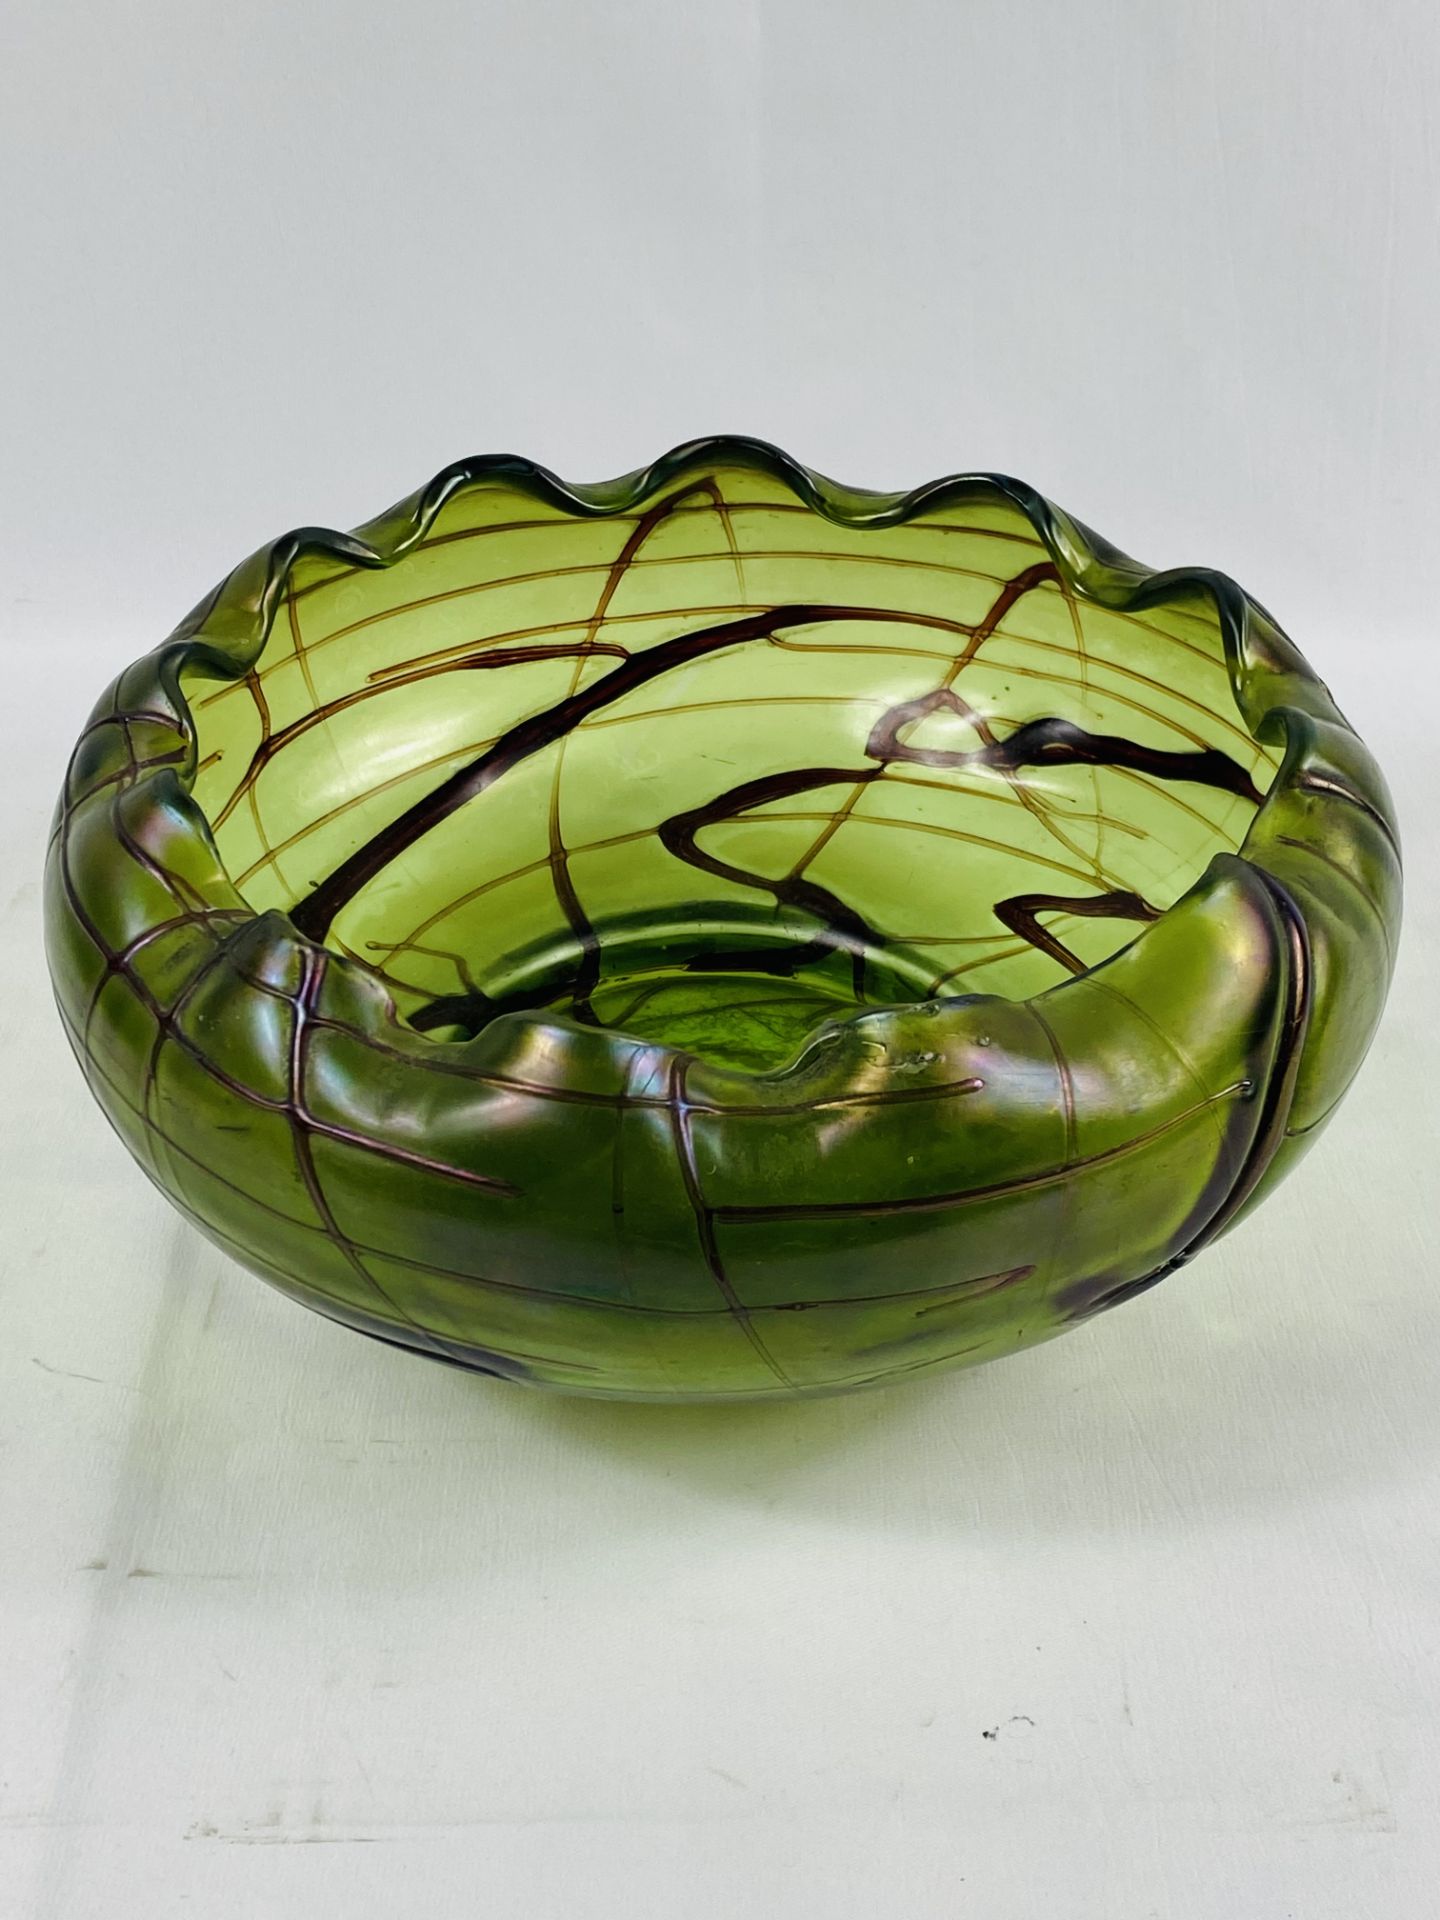 Green glass sgraffito style bowl with scalloped rim - Image 4 of 7